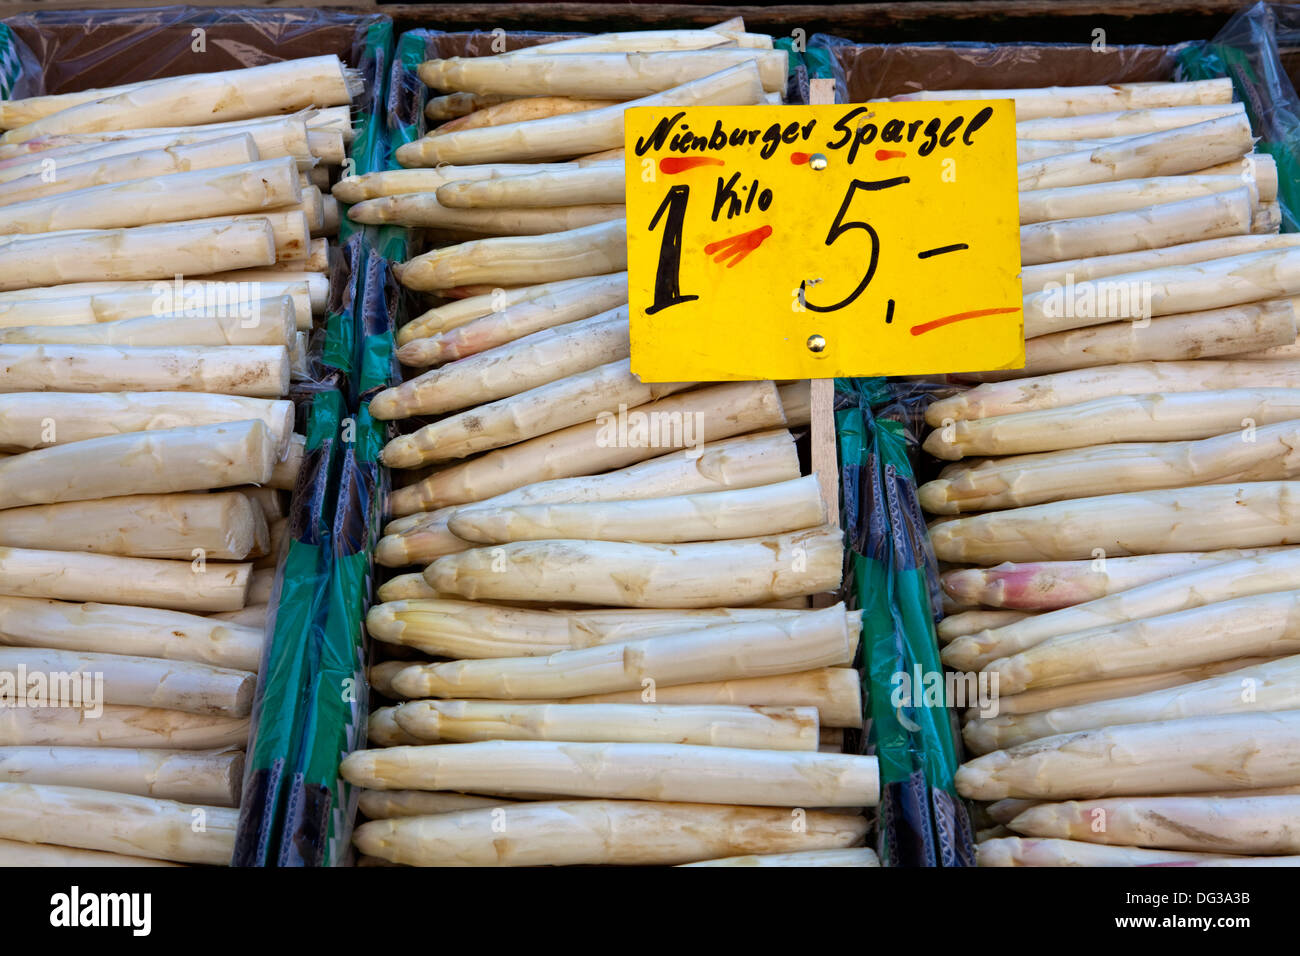 Asparagus from Nienburg at a market stall, Hanover, Lower Saxony, Germany, Stock Photo